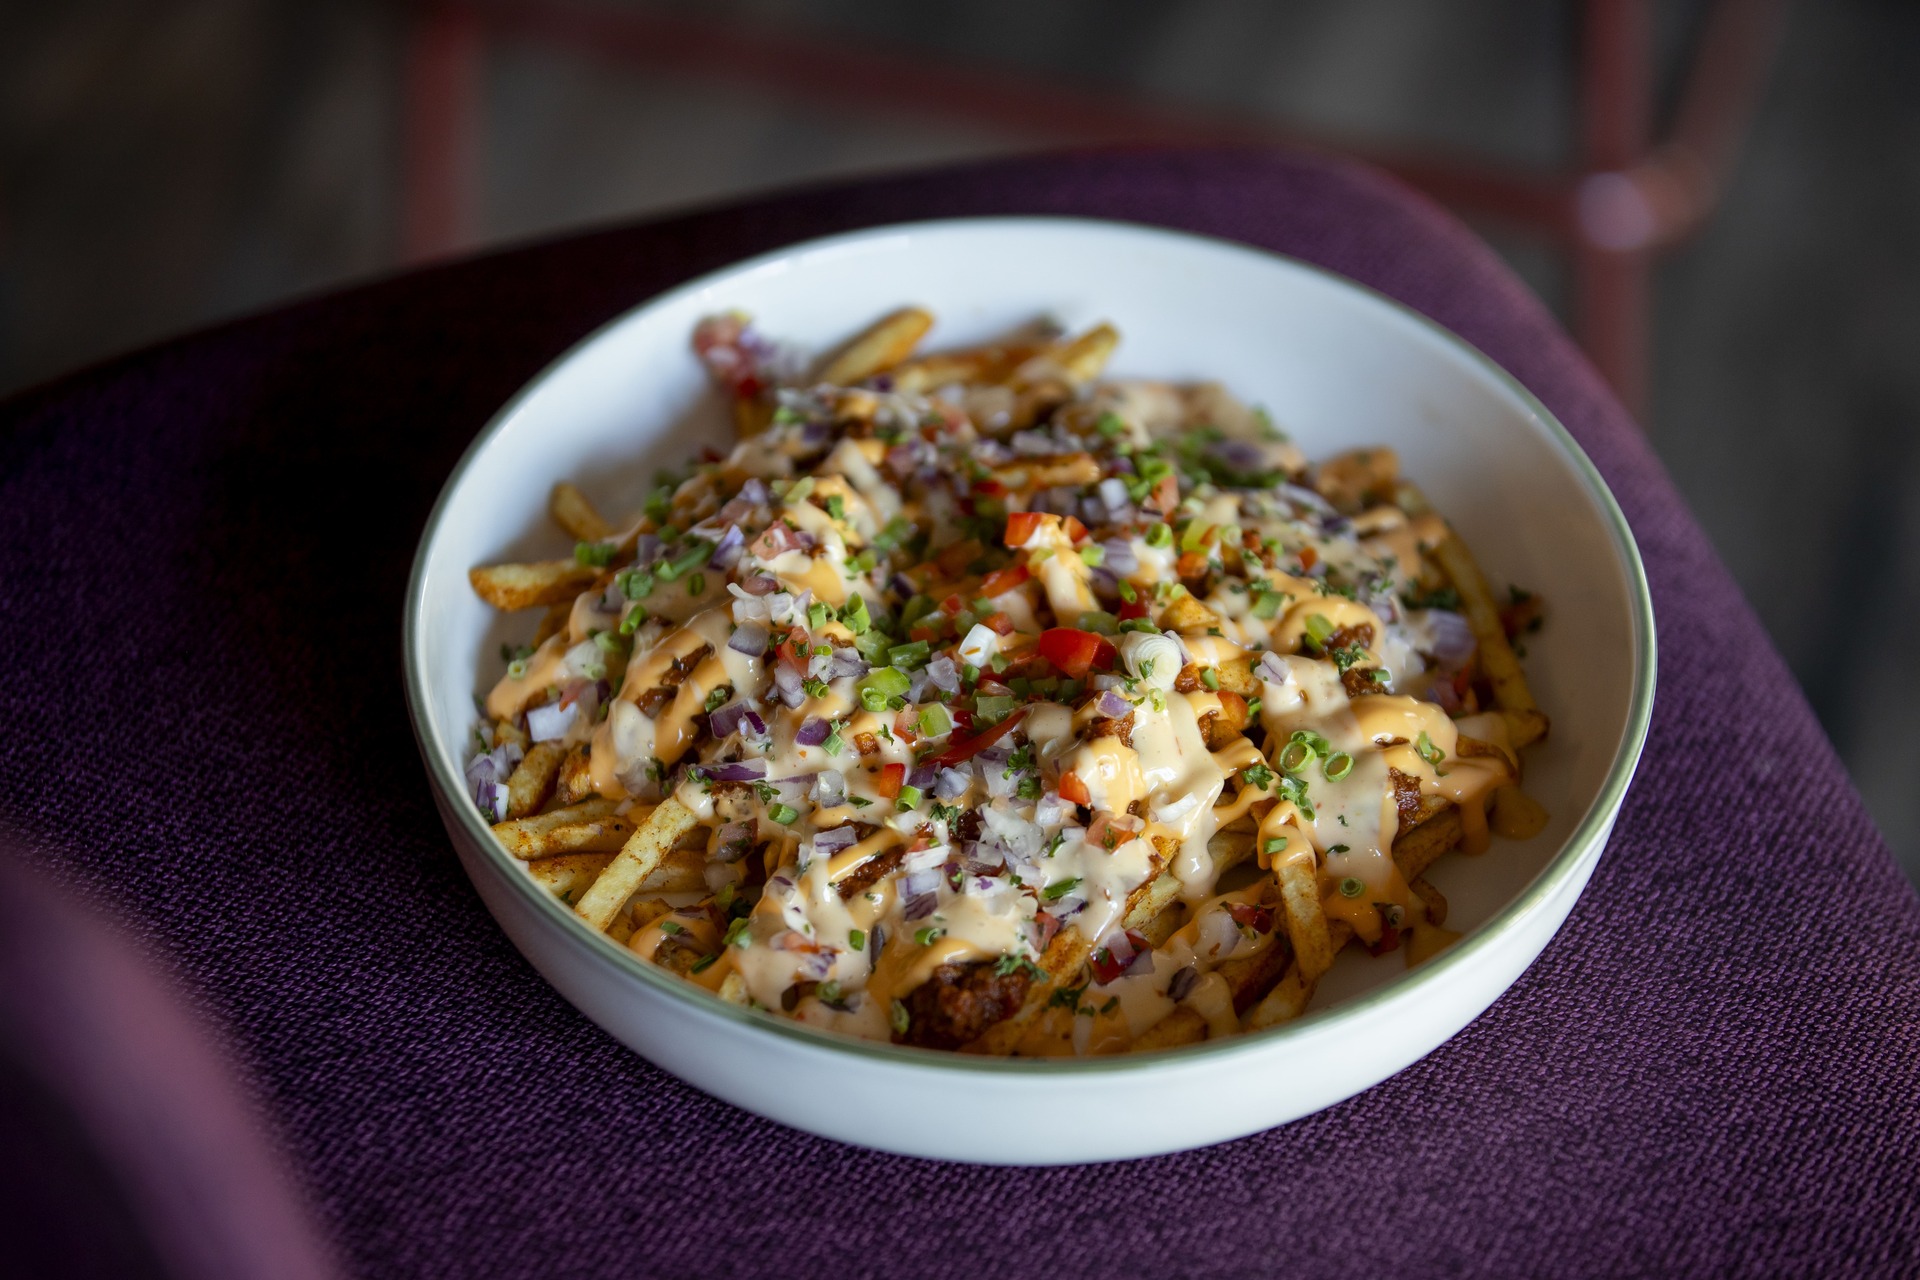 The ultimate loaded fries at Hop & Huddle